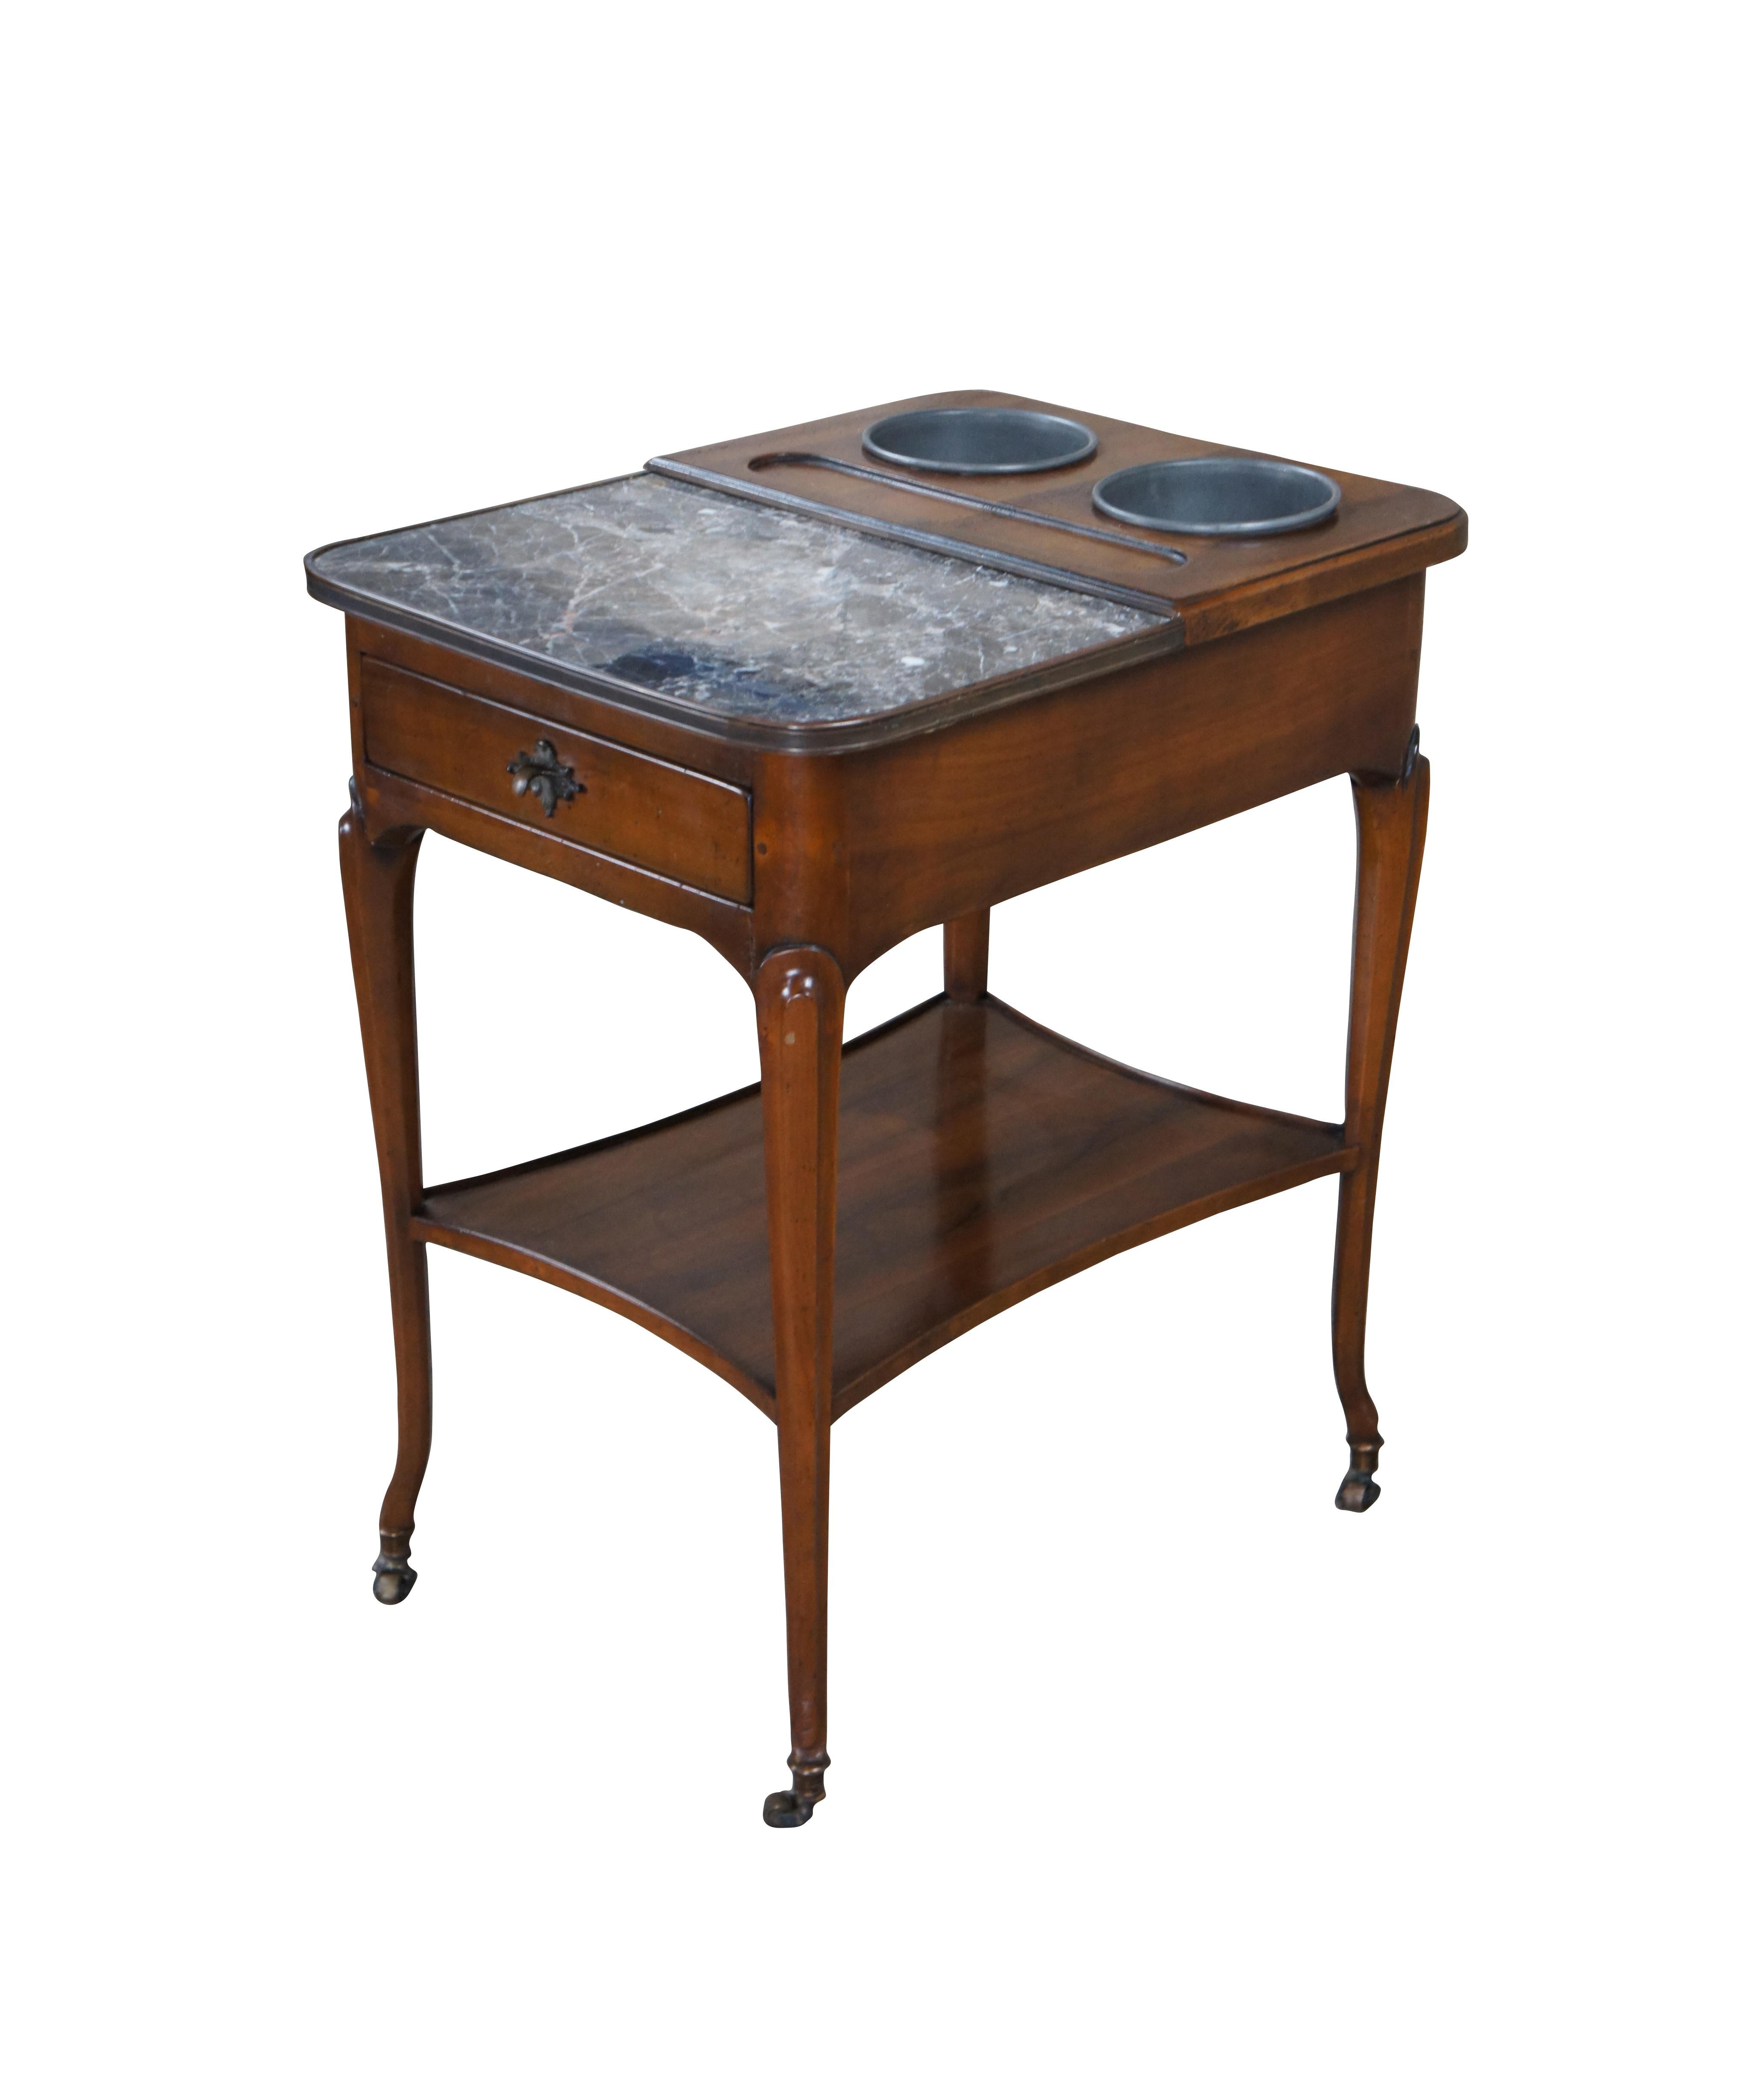 Exceptional Rafraichissoir Wine / Champagne Cooler Table in Cherry and Walnut, circa 1930s

Features a marble tray top and ingot mold with two metal cooler buckets. Includes a central drawer with bronze pull, long tapered legs, arched feet with